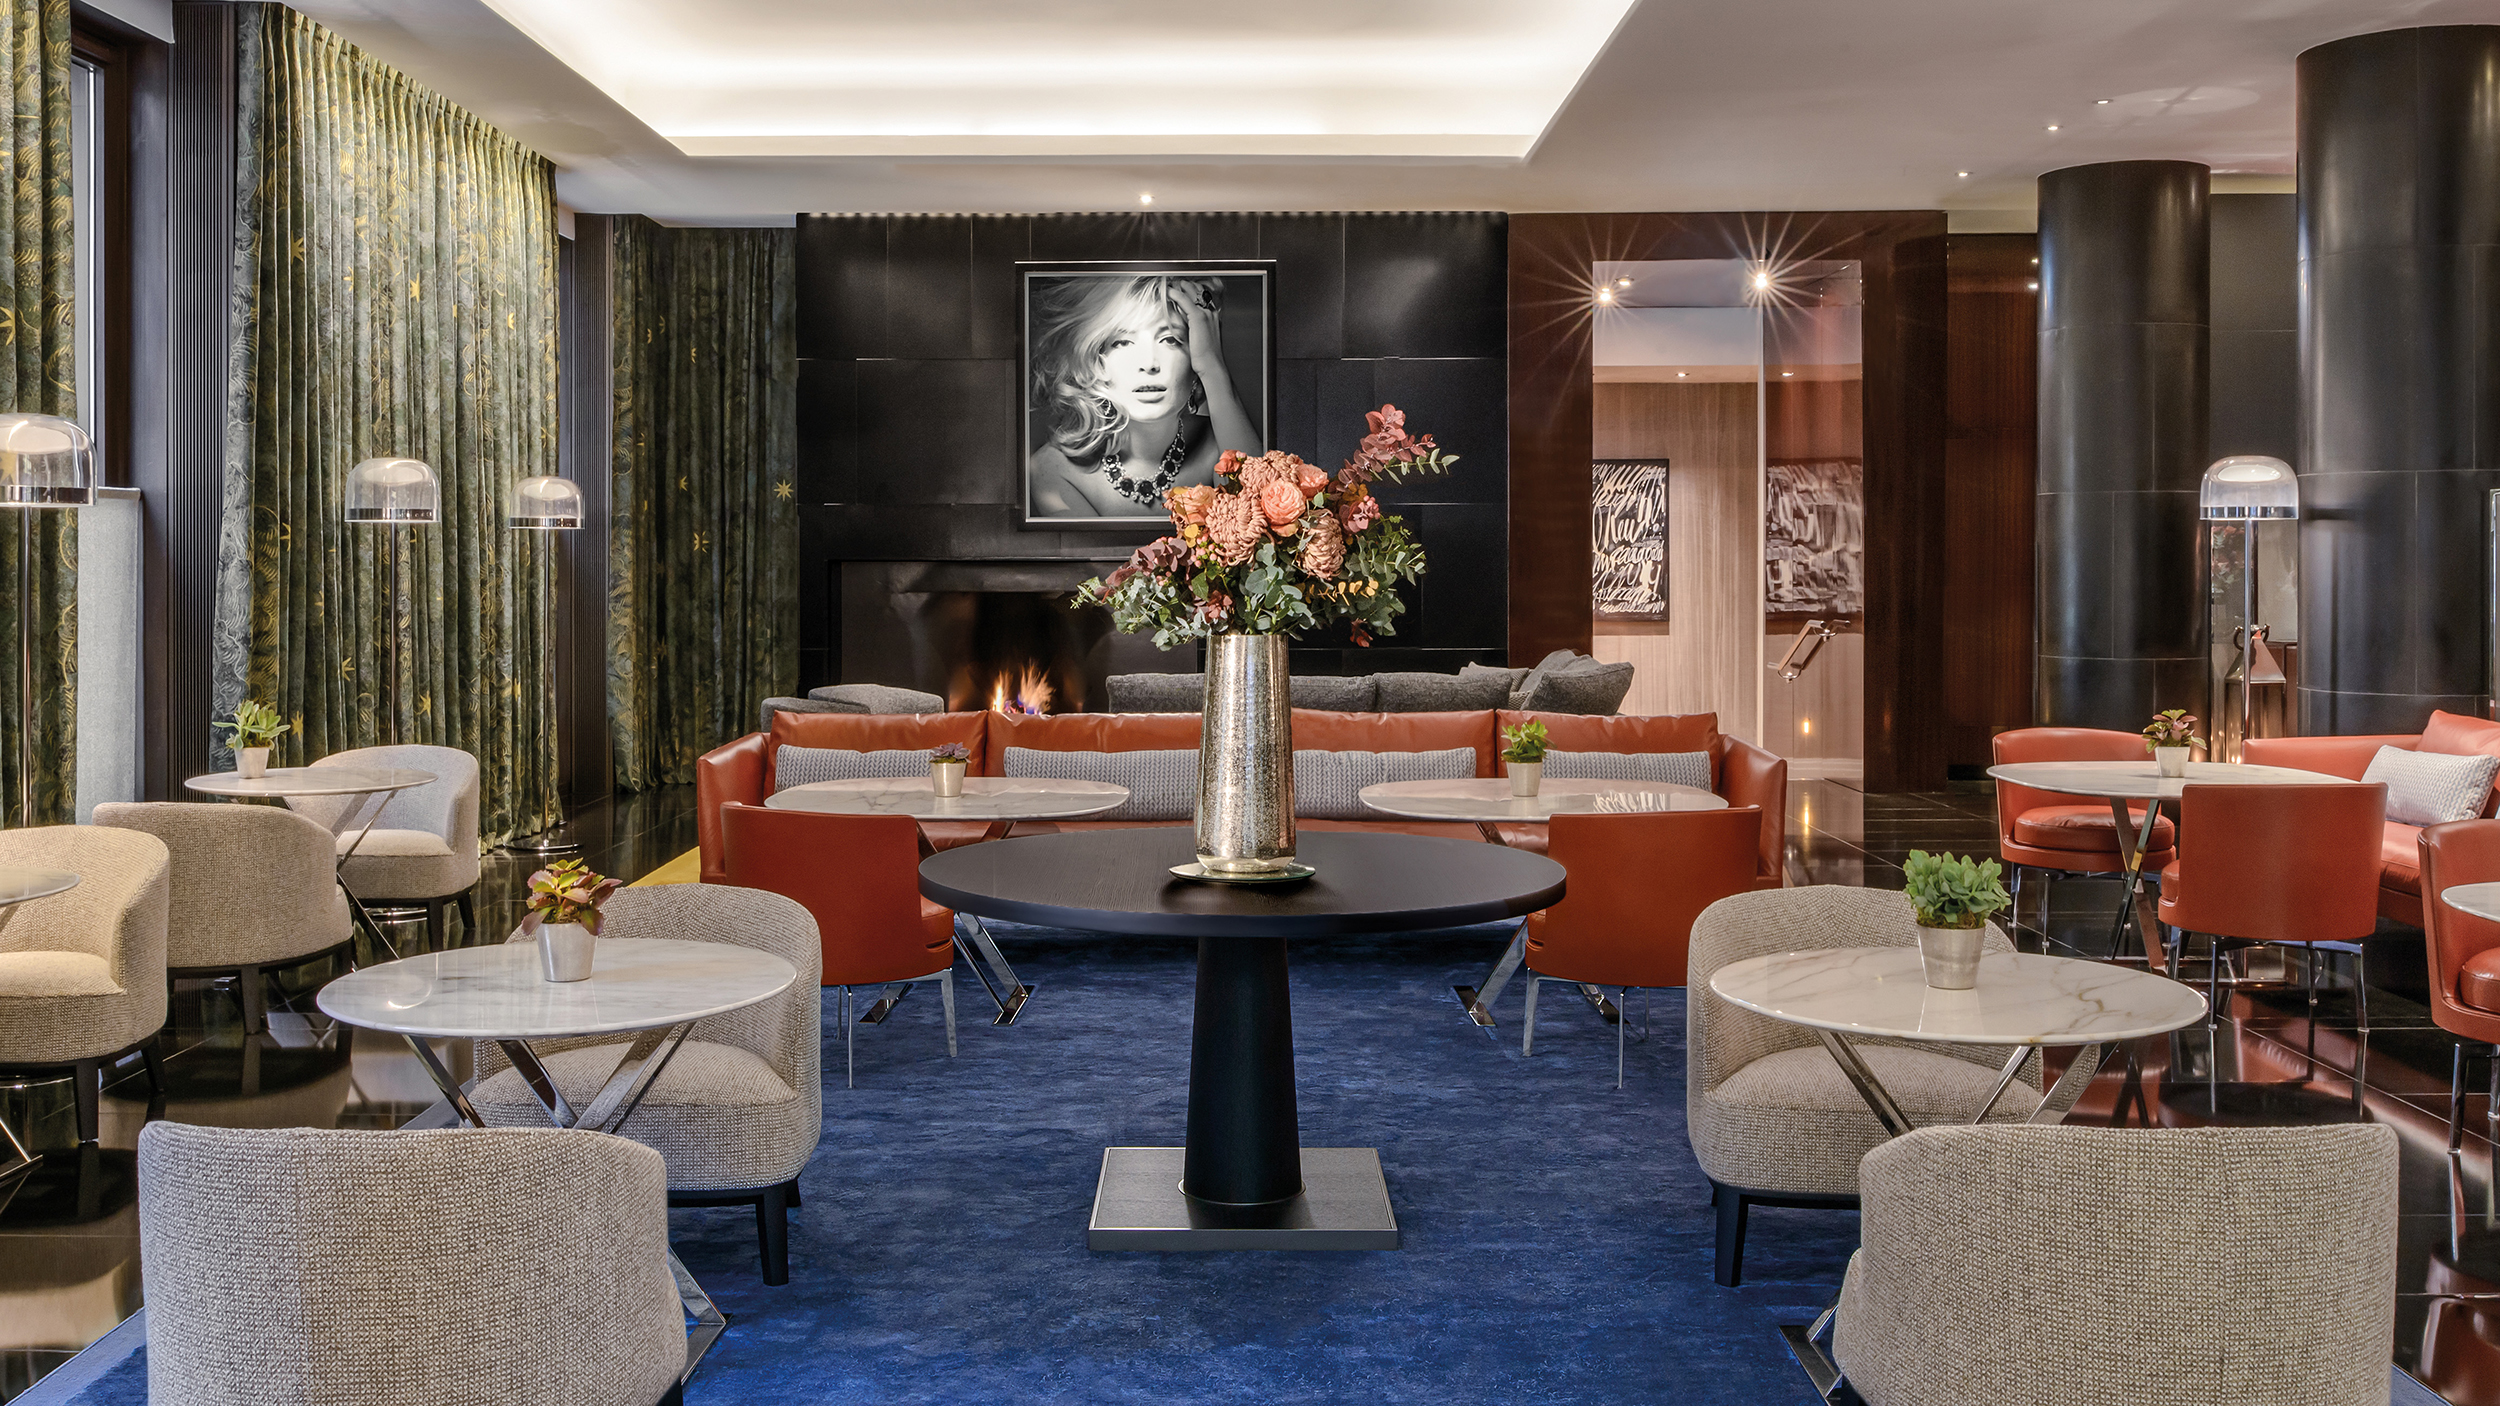 Bulgari Hotel London: A Secluded Sanctuary in Central London